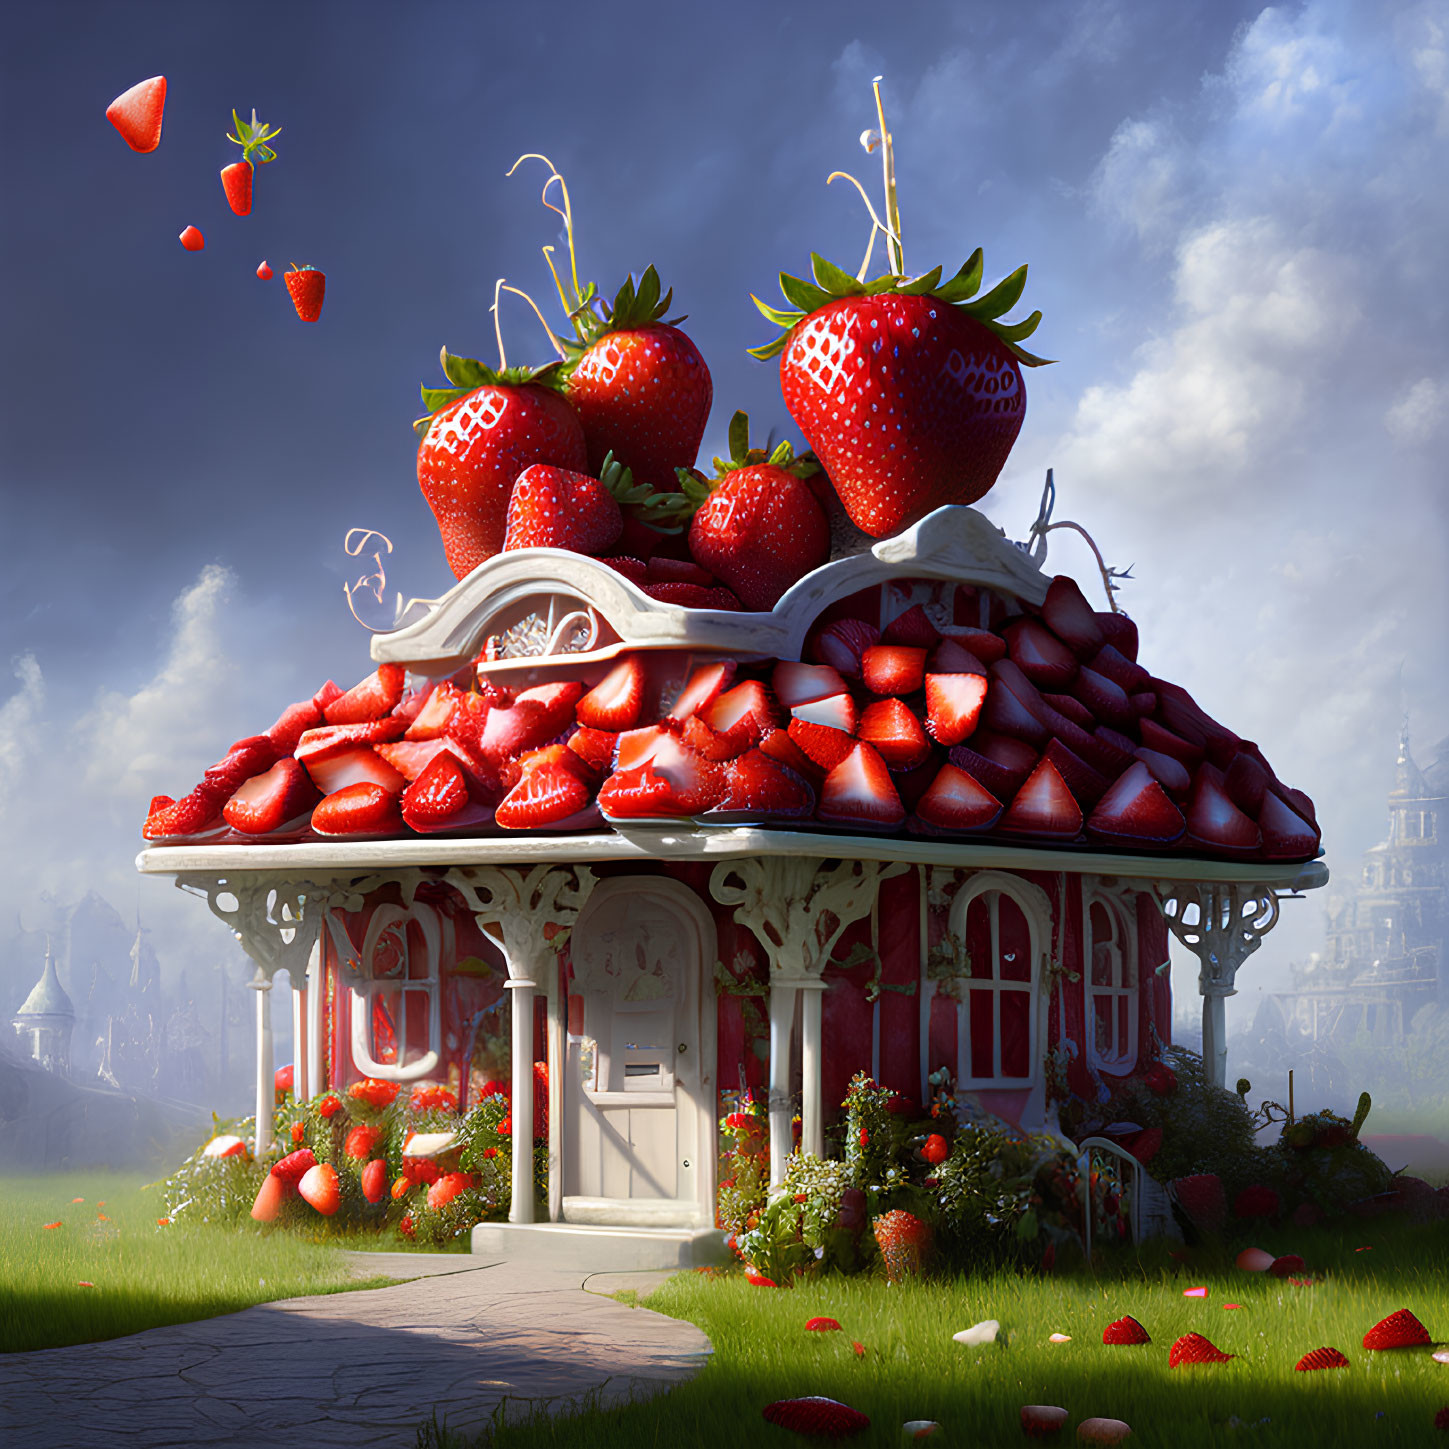 Whimsical Strawberry-Themed House with Giant Strawberries and Lush Surroundings